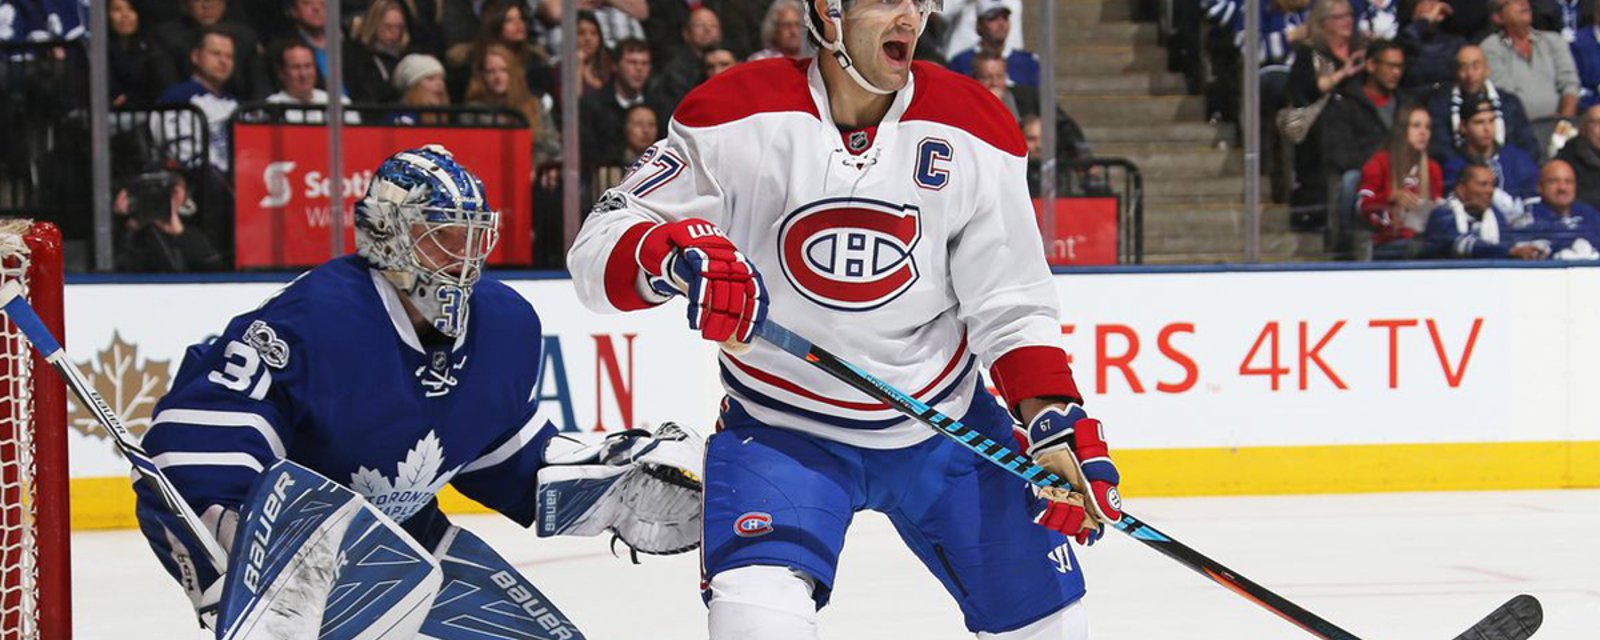 Your Call: Should the Leafs trade for Pacioretty?